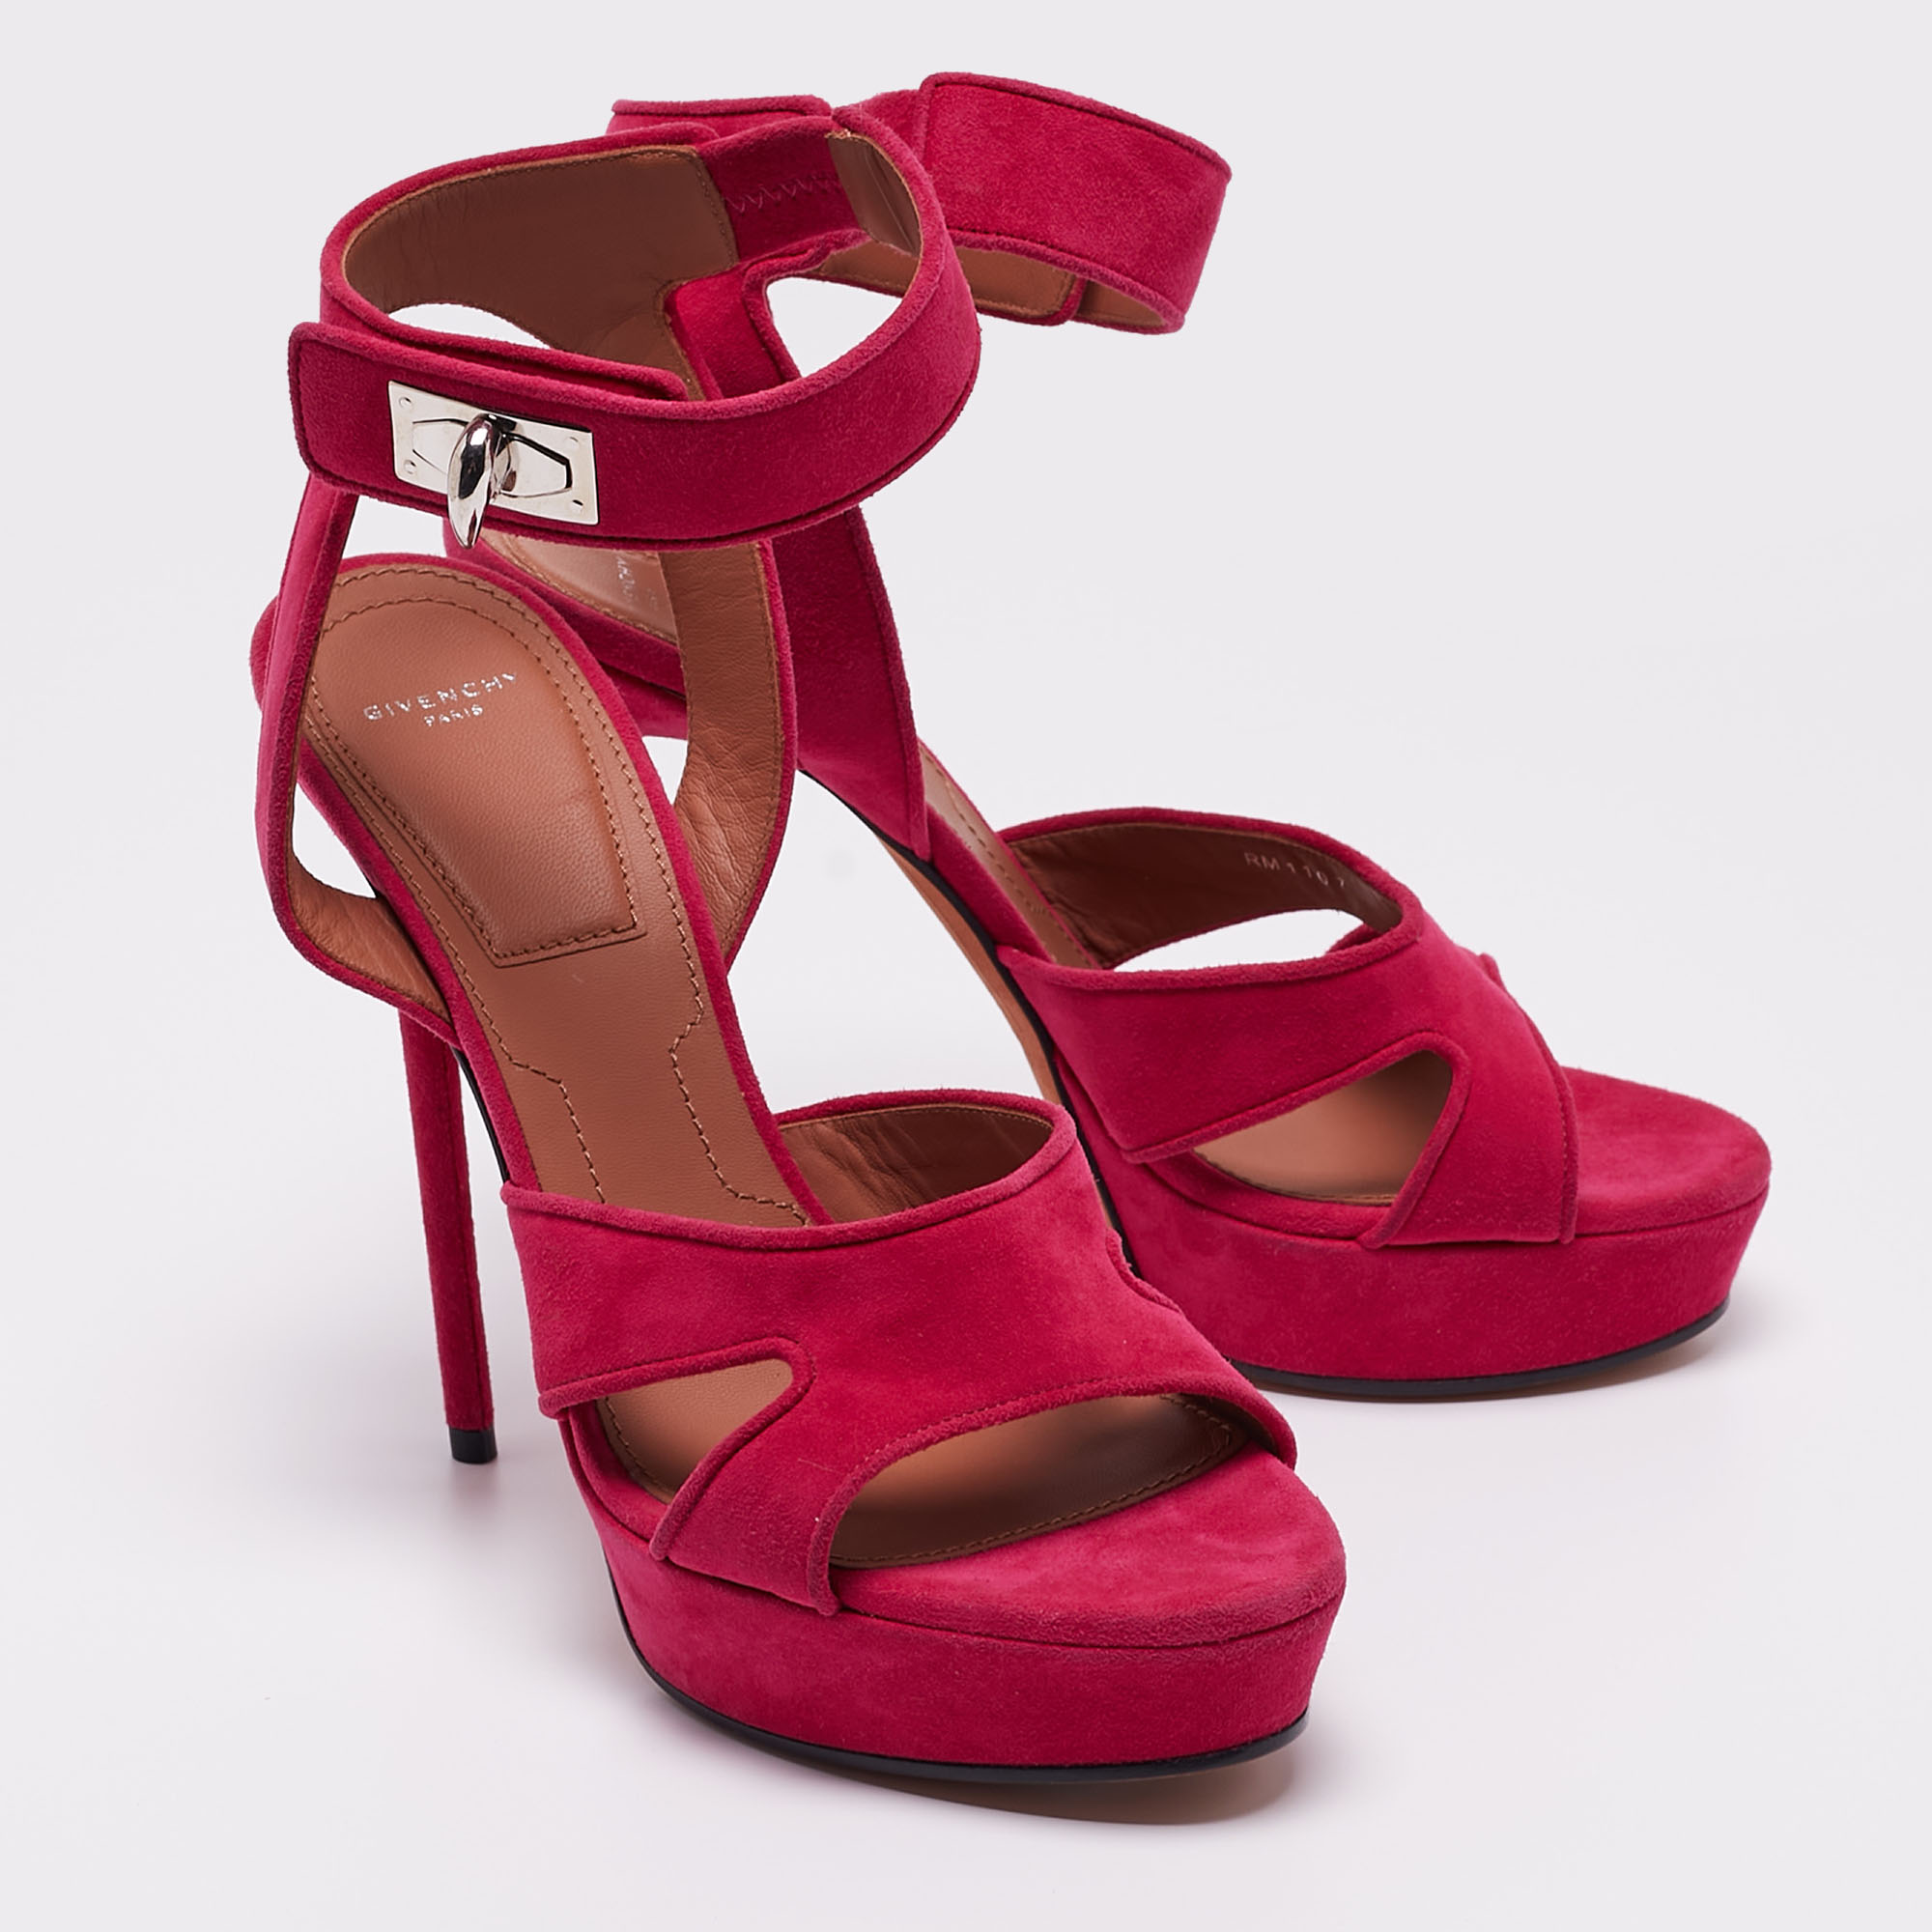 Givenchy Fuchsia Suede Shark Tooth Ankle Strap Platform Sandals Size 40